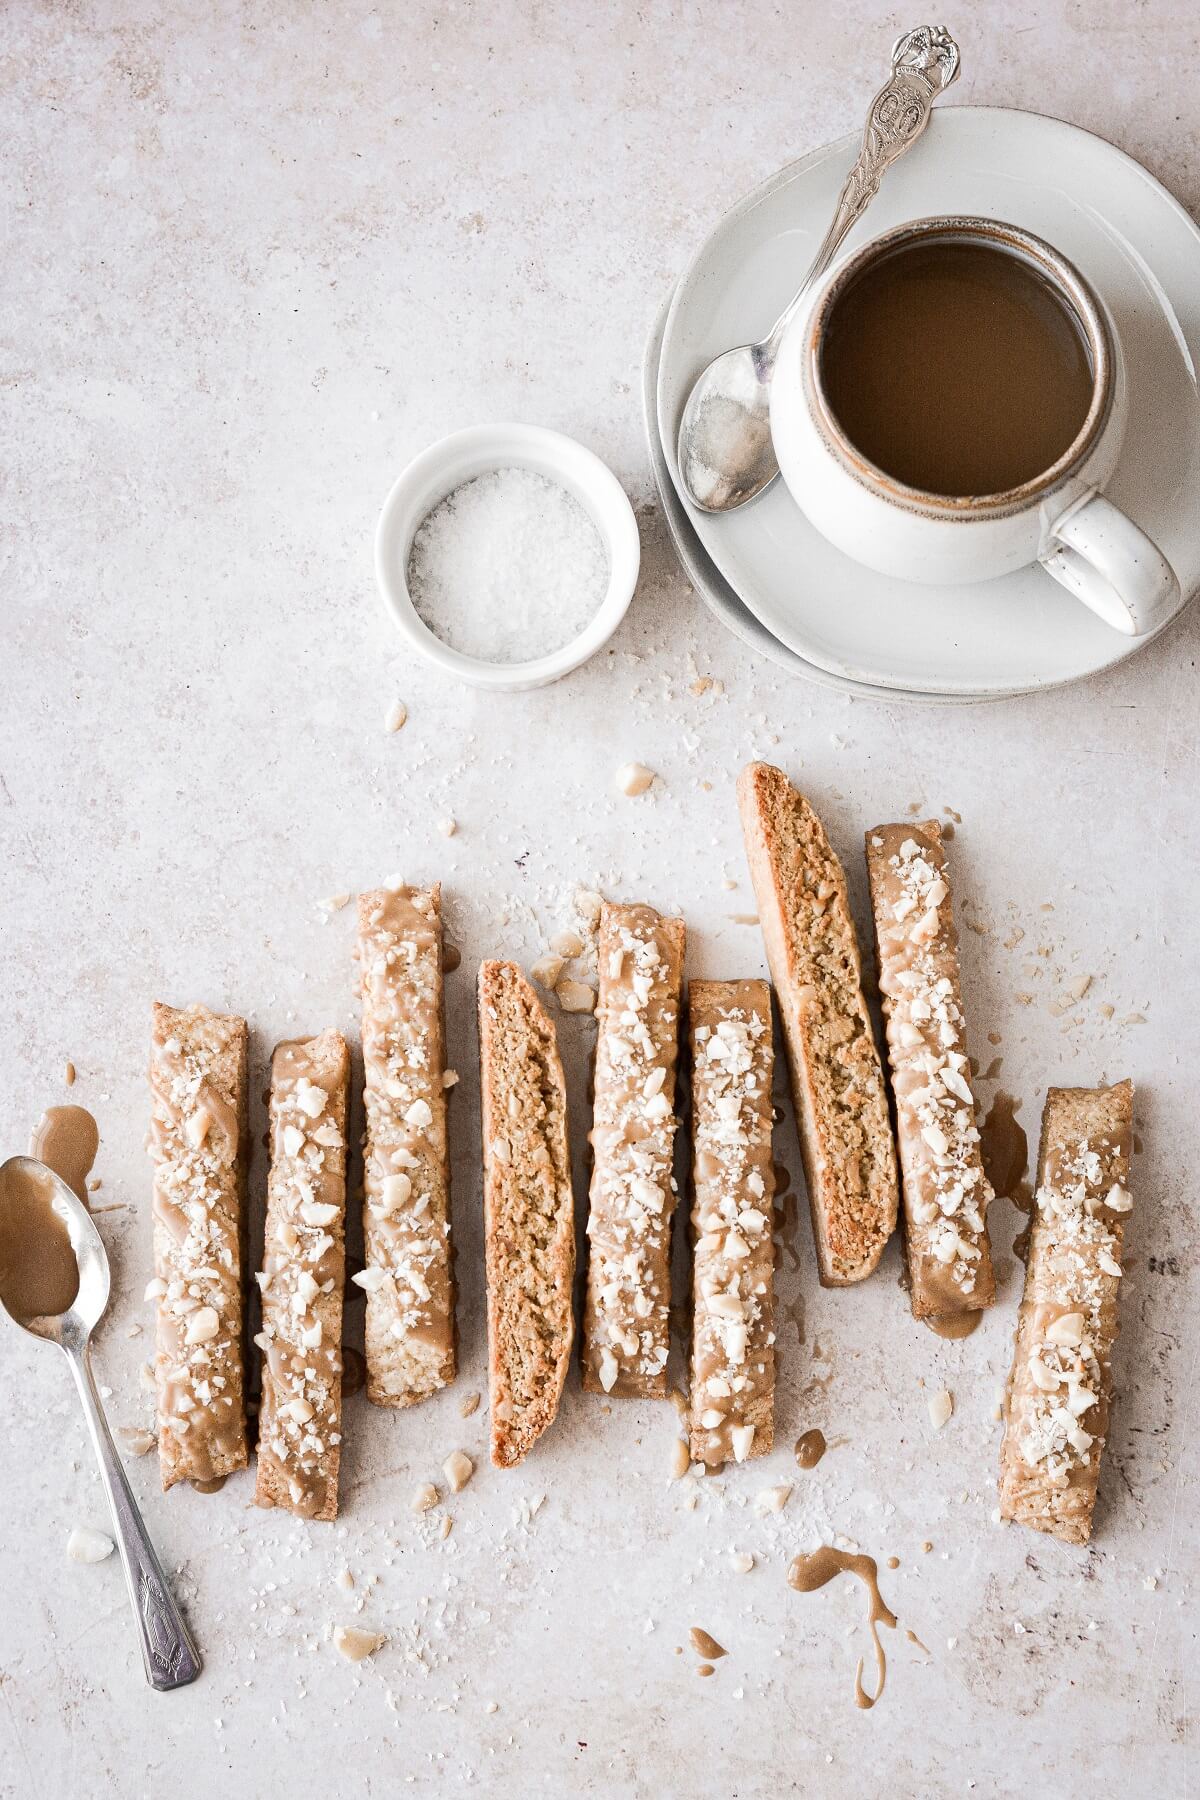 Maple macadamia nut biscotti next to a cup of coffee.